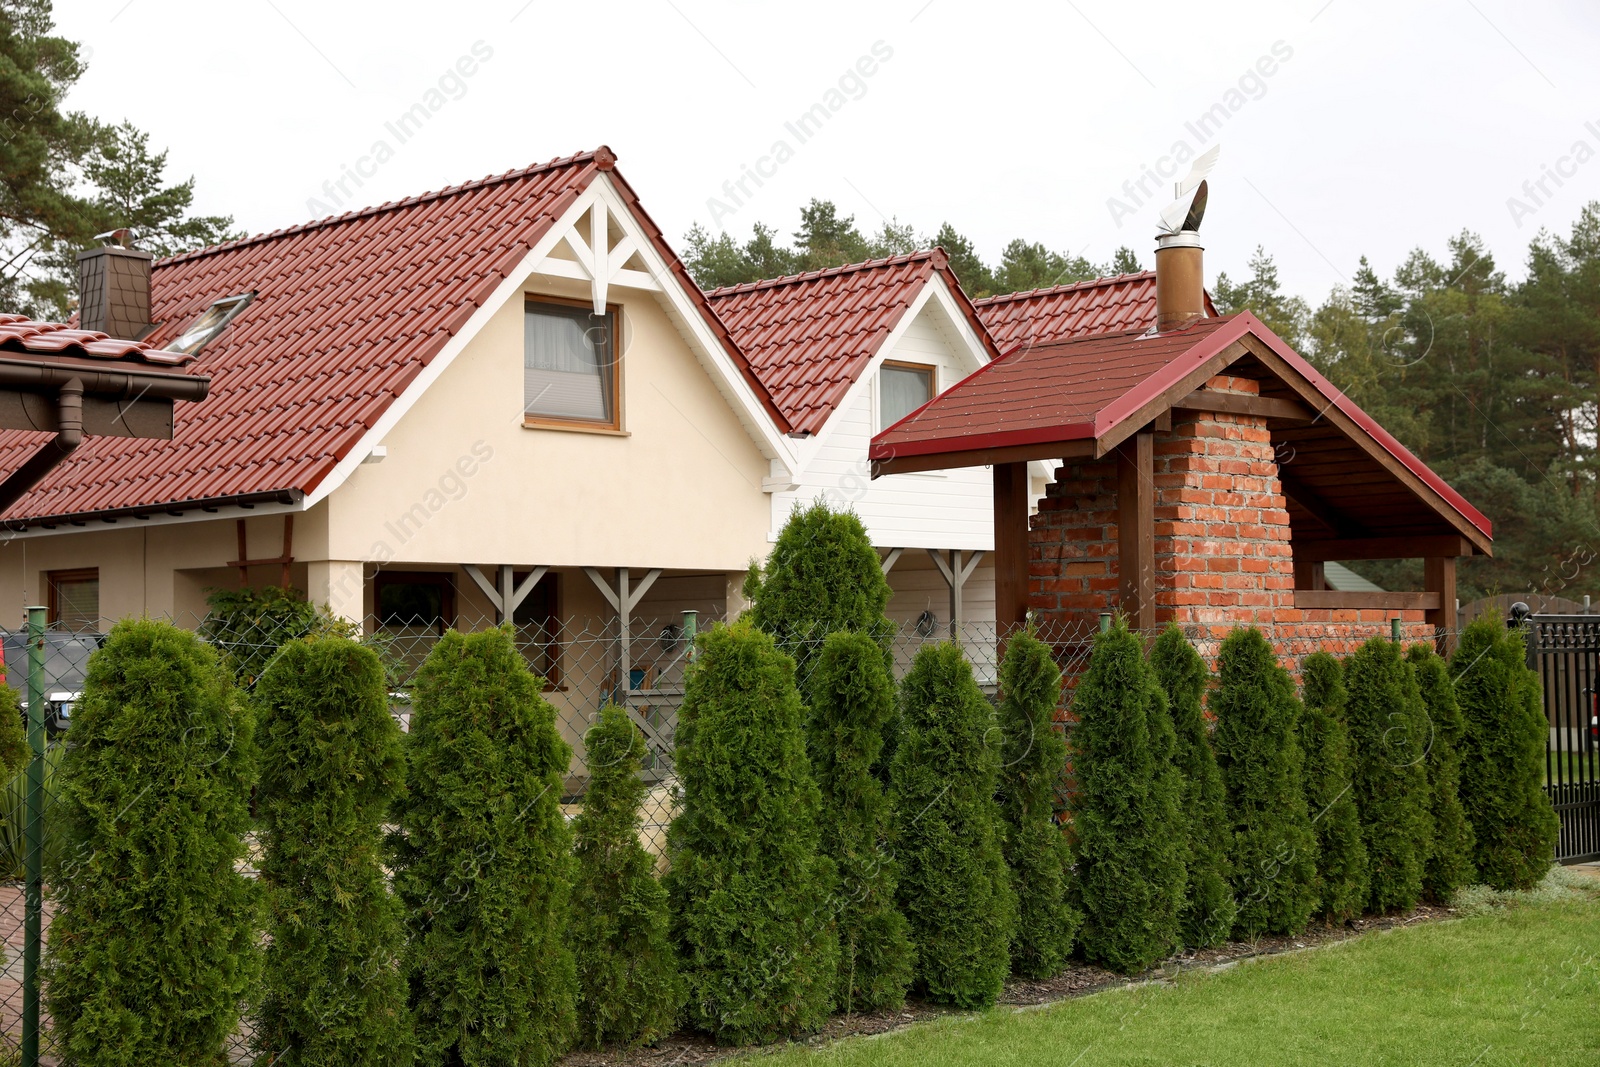 Photo of Beautiful two storey beach house and green trees outdoors